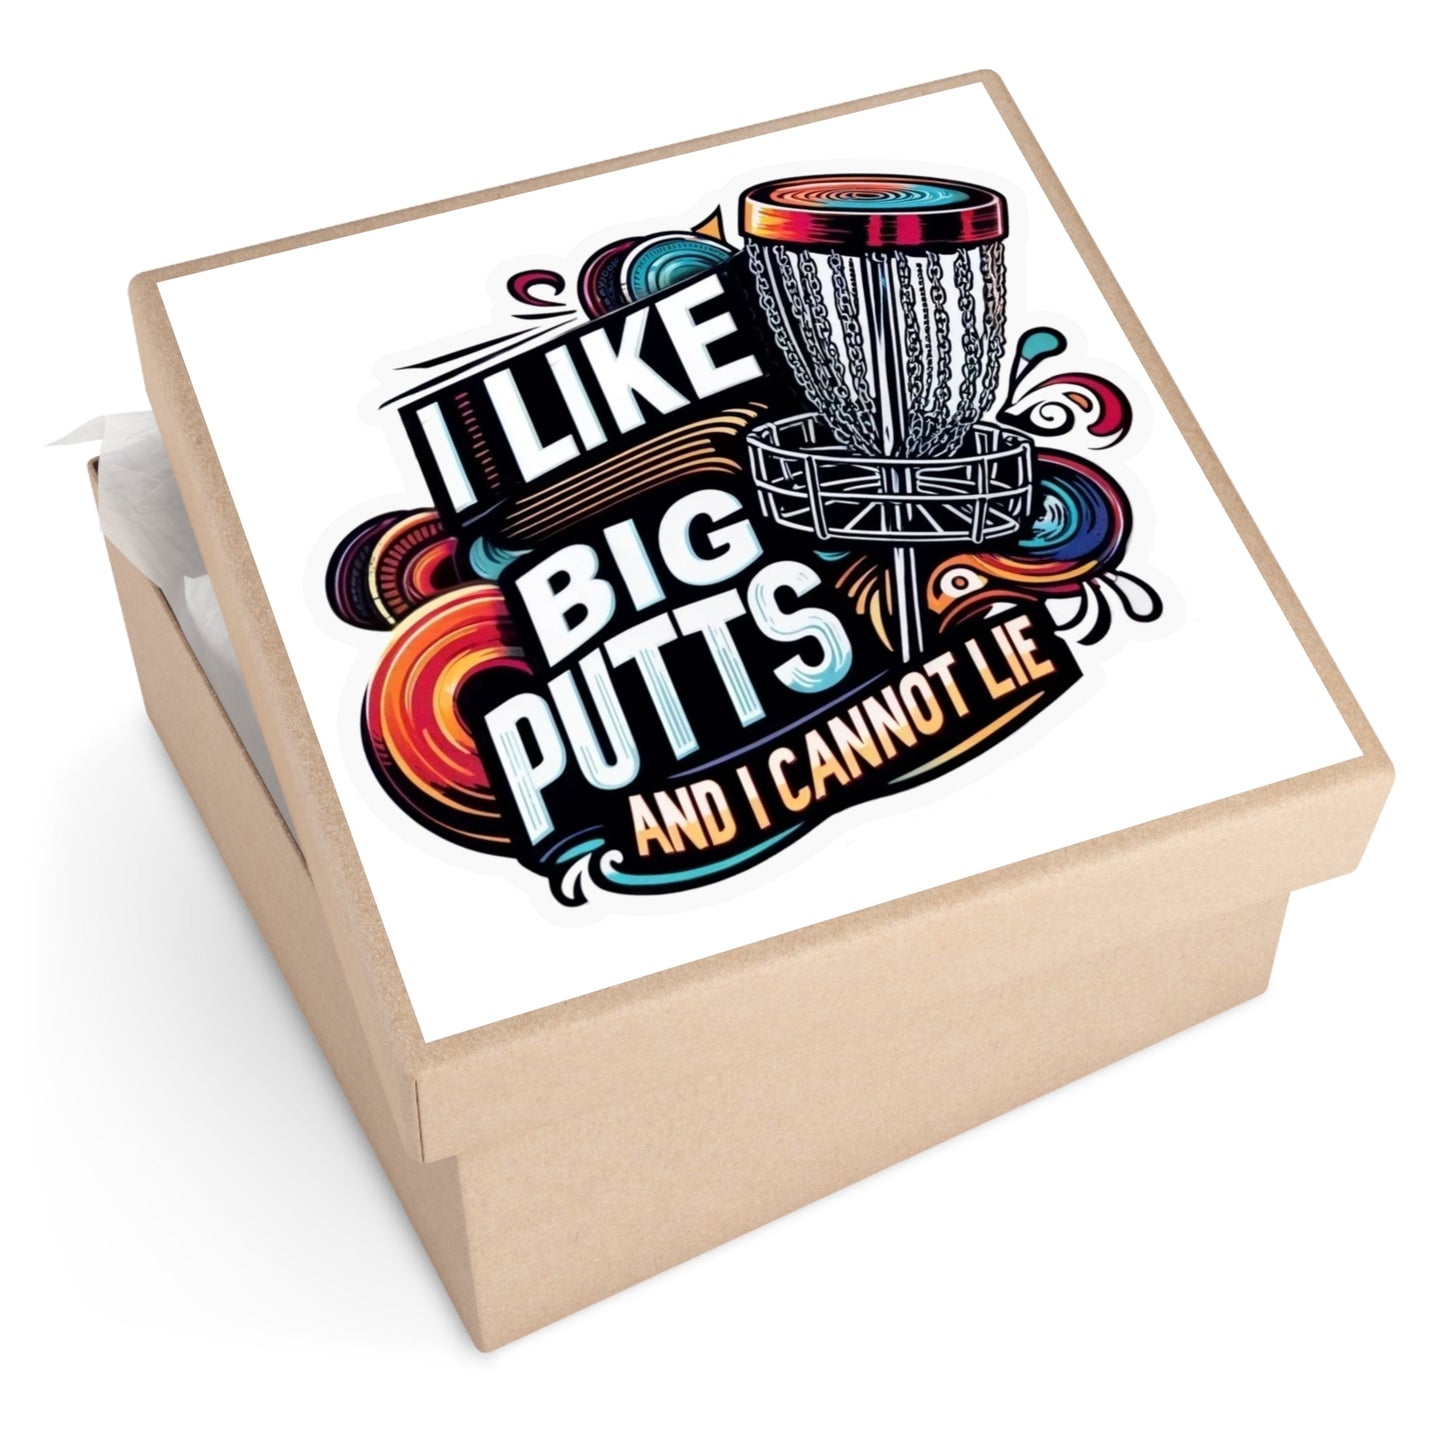 Funny Disc Golf Sticker - I Like Big Putts and I Cannot Lie - Square Vinyl Stickers - Quirky Goodies